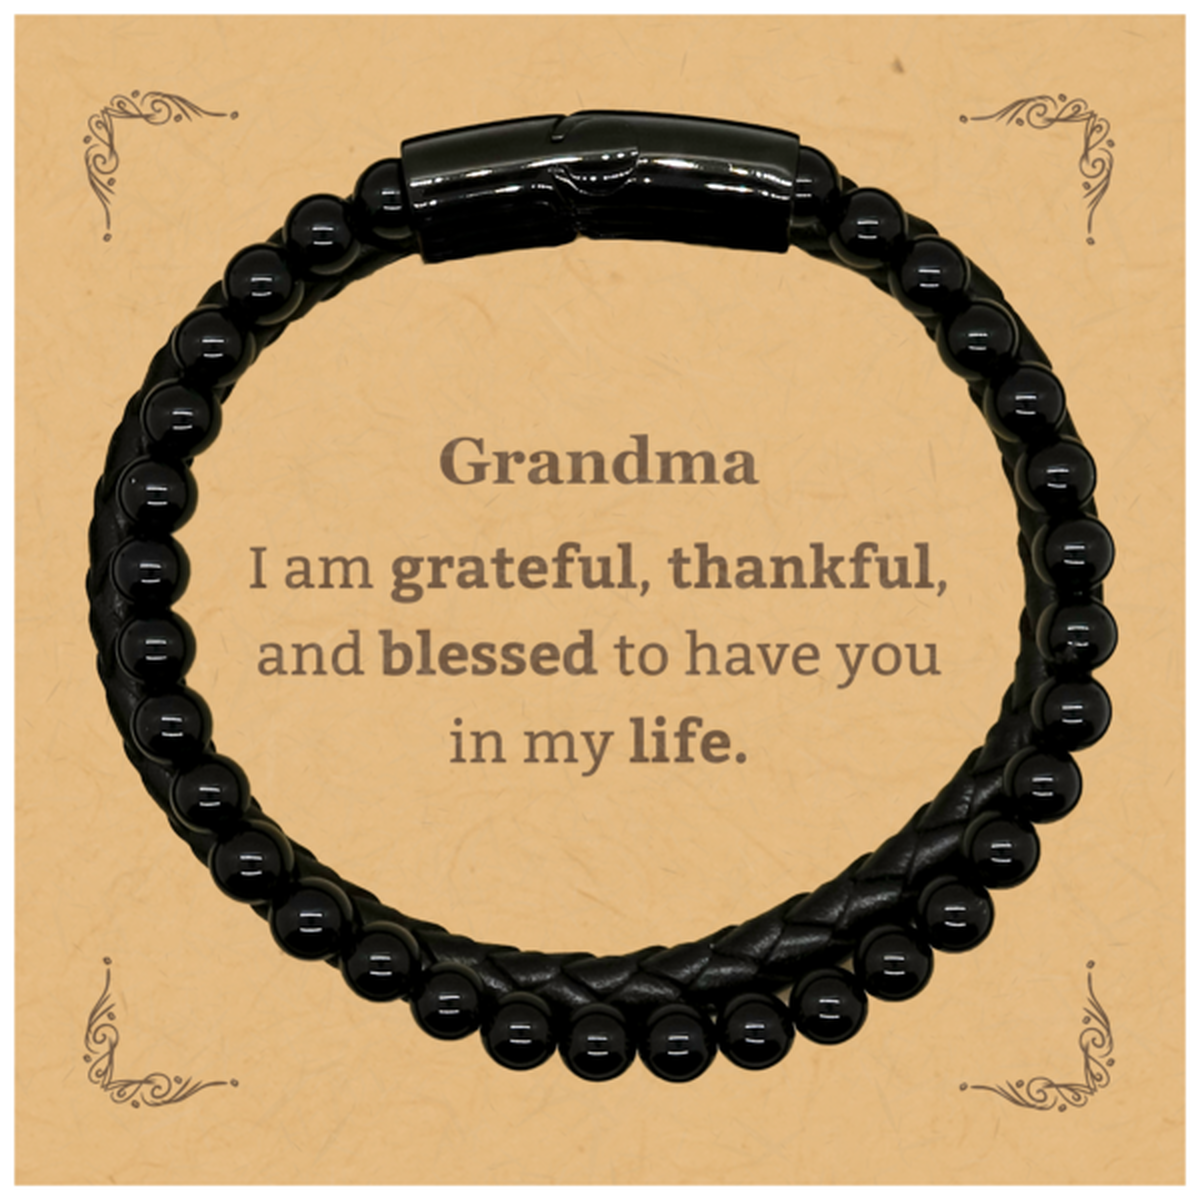 Grandma Appreciation Gifts, I am grateful, thankful, and blessed, Thank You Stone Leather Bracelets for Grandma, Birthday Inspiration Gifts for Grandma